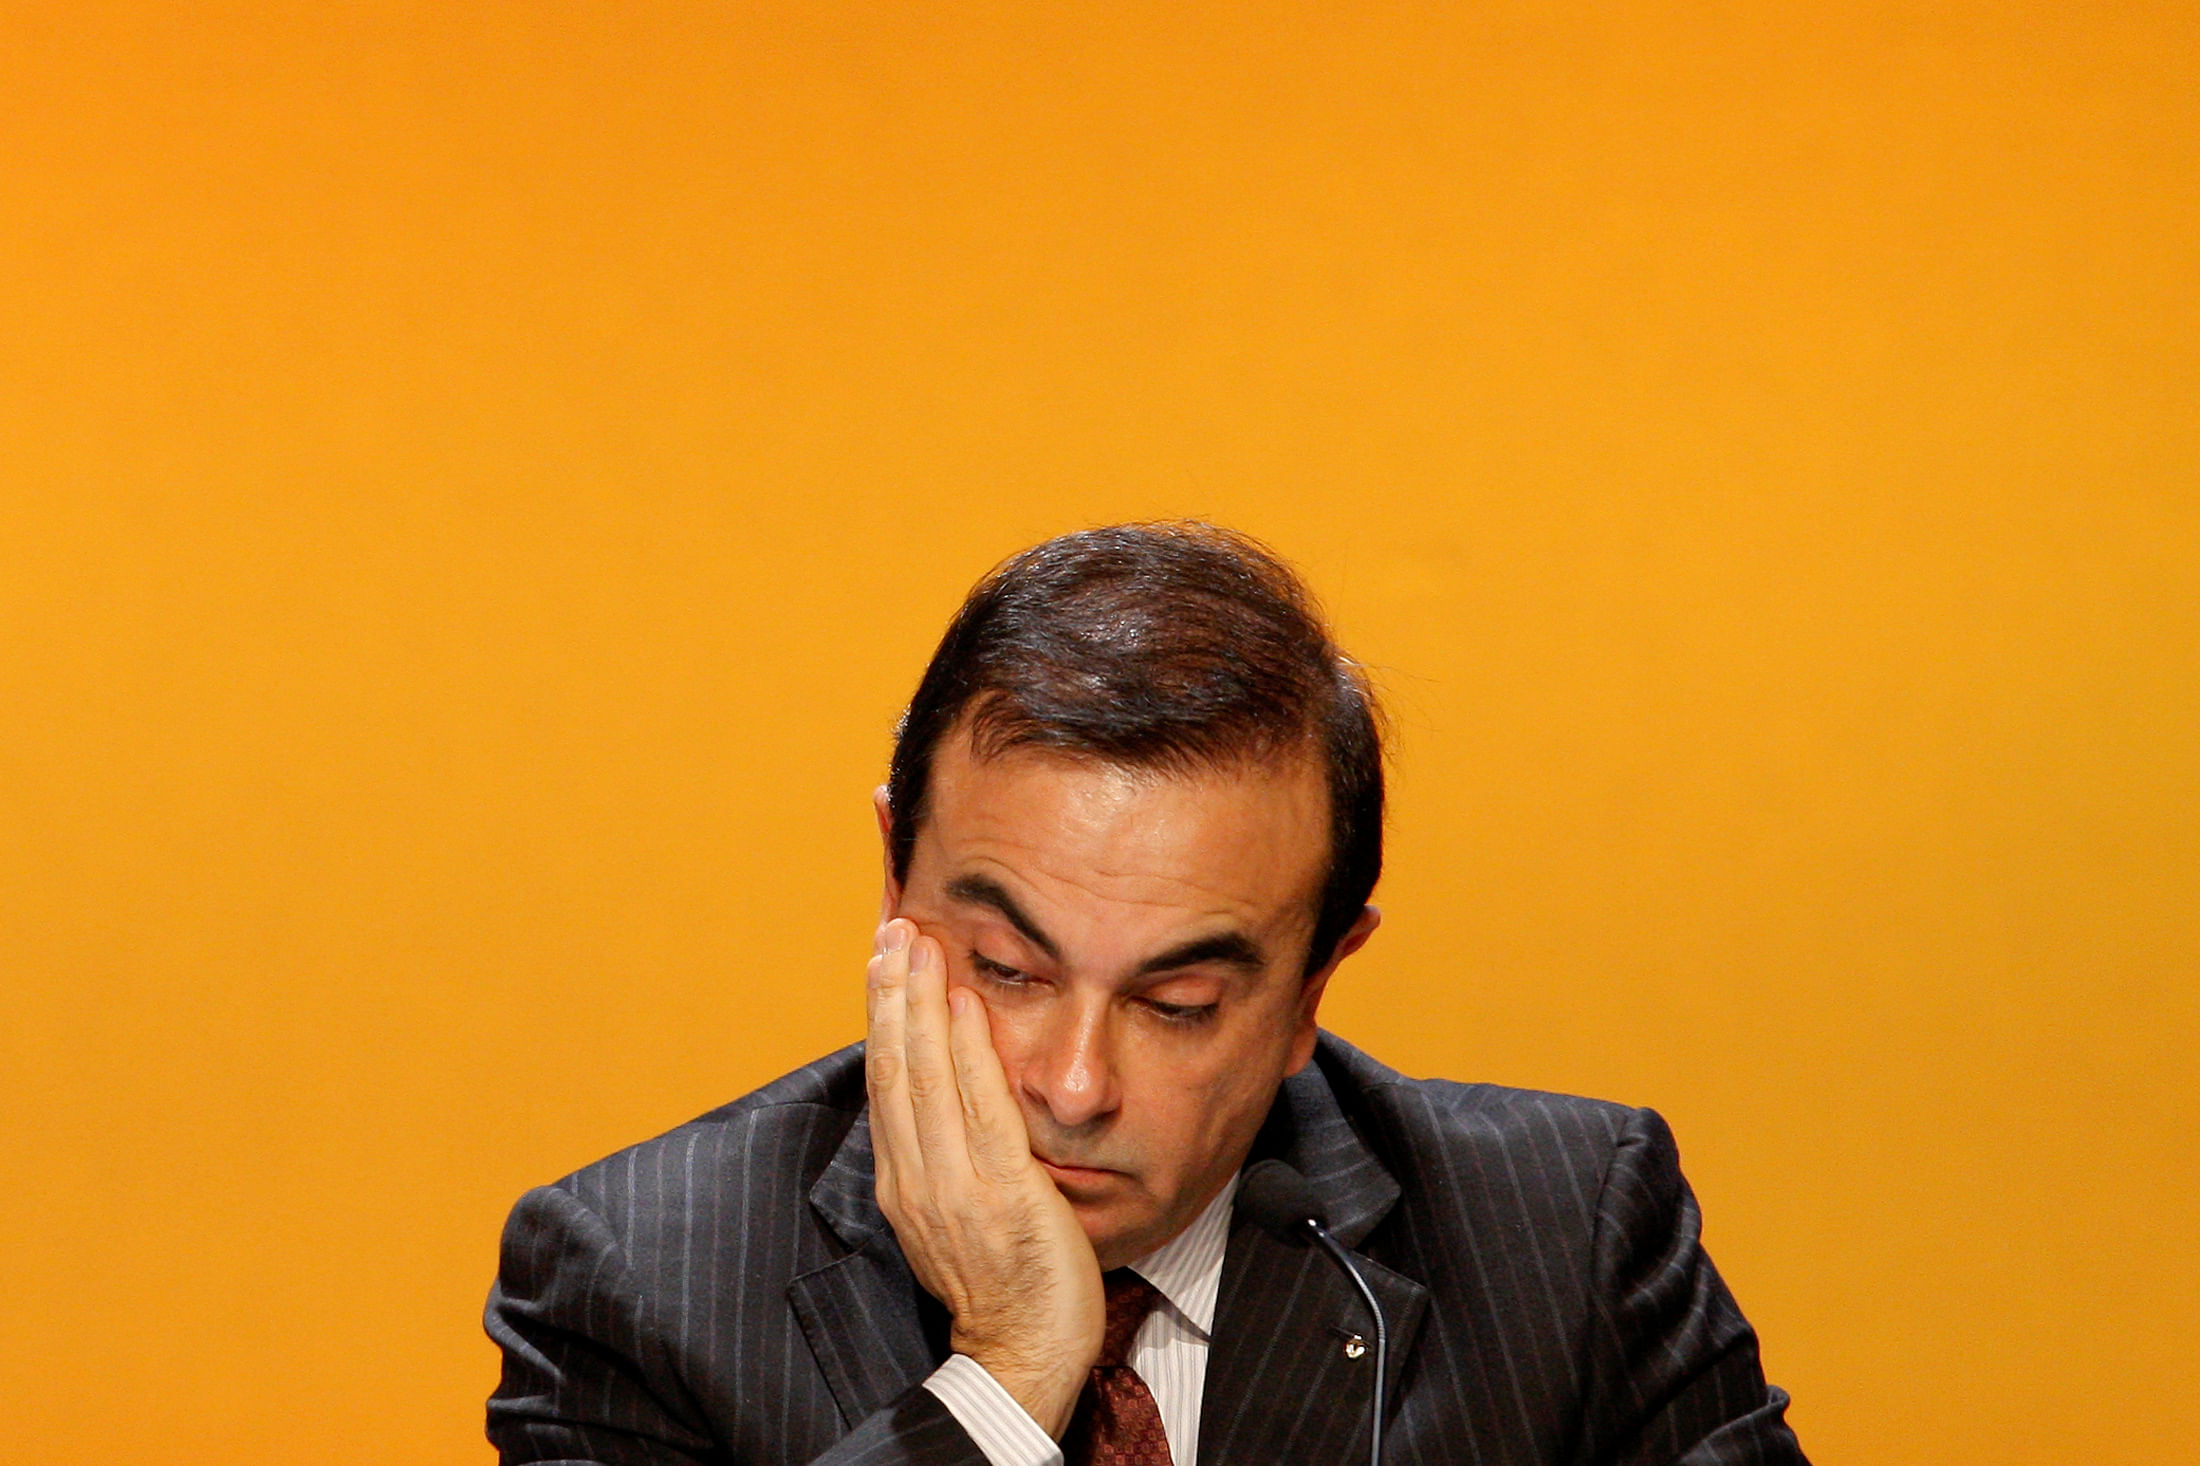 Carlos Ghosn, former President and Chief Executive Officer of Renault. (Reuters Photo)